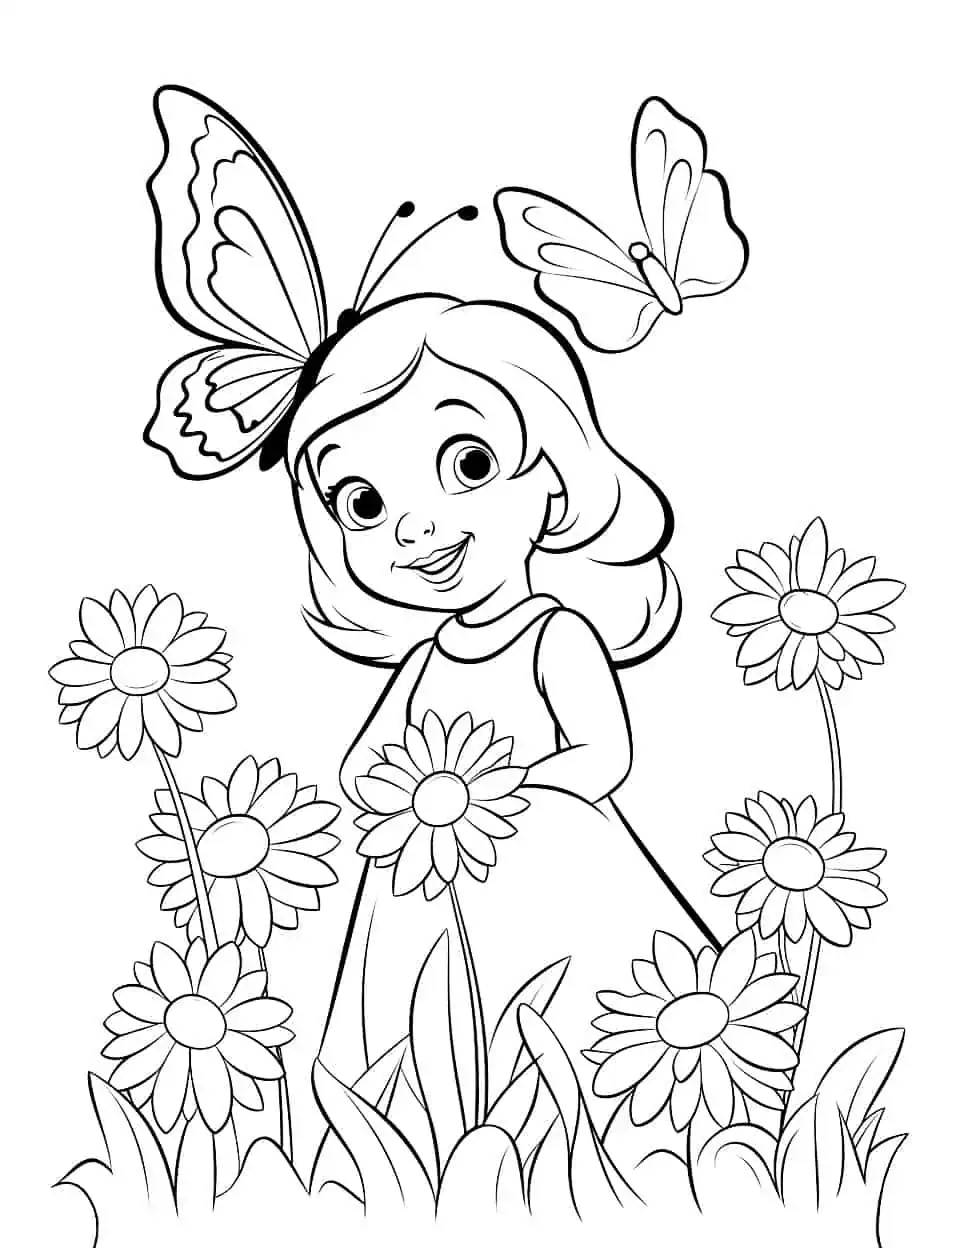 Princess Spring Scene Coloring Page - A coloring sheet with a princess celebrating the arrival of spring, featuring flowers, and butterflies.